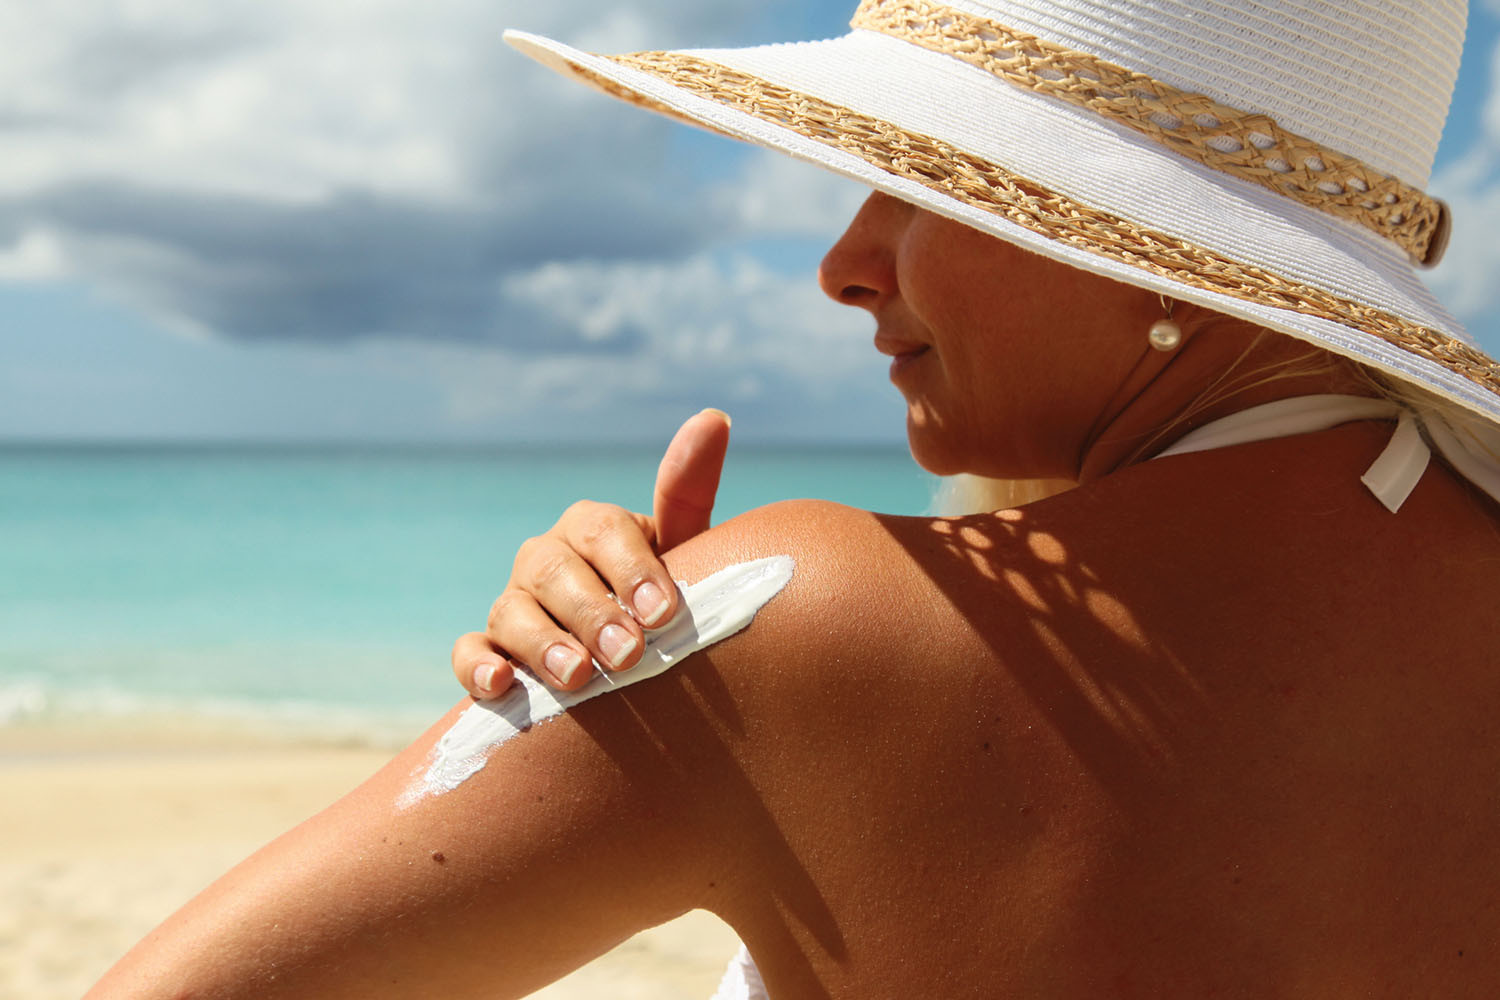 photo of a woman on a beach wearing a sun hat viewed from behind as she applies sunscreen to her upper arm